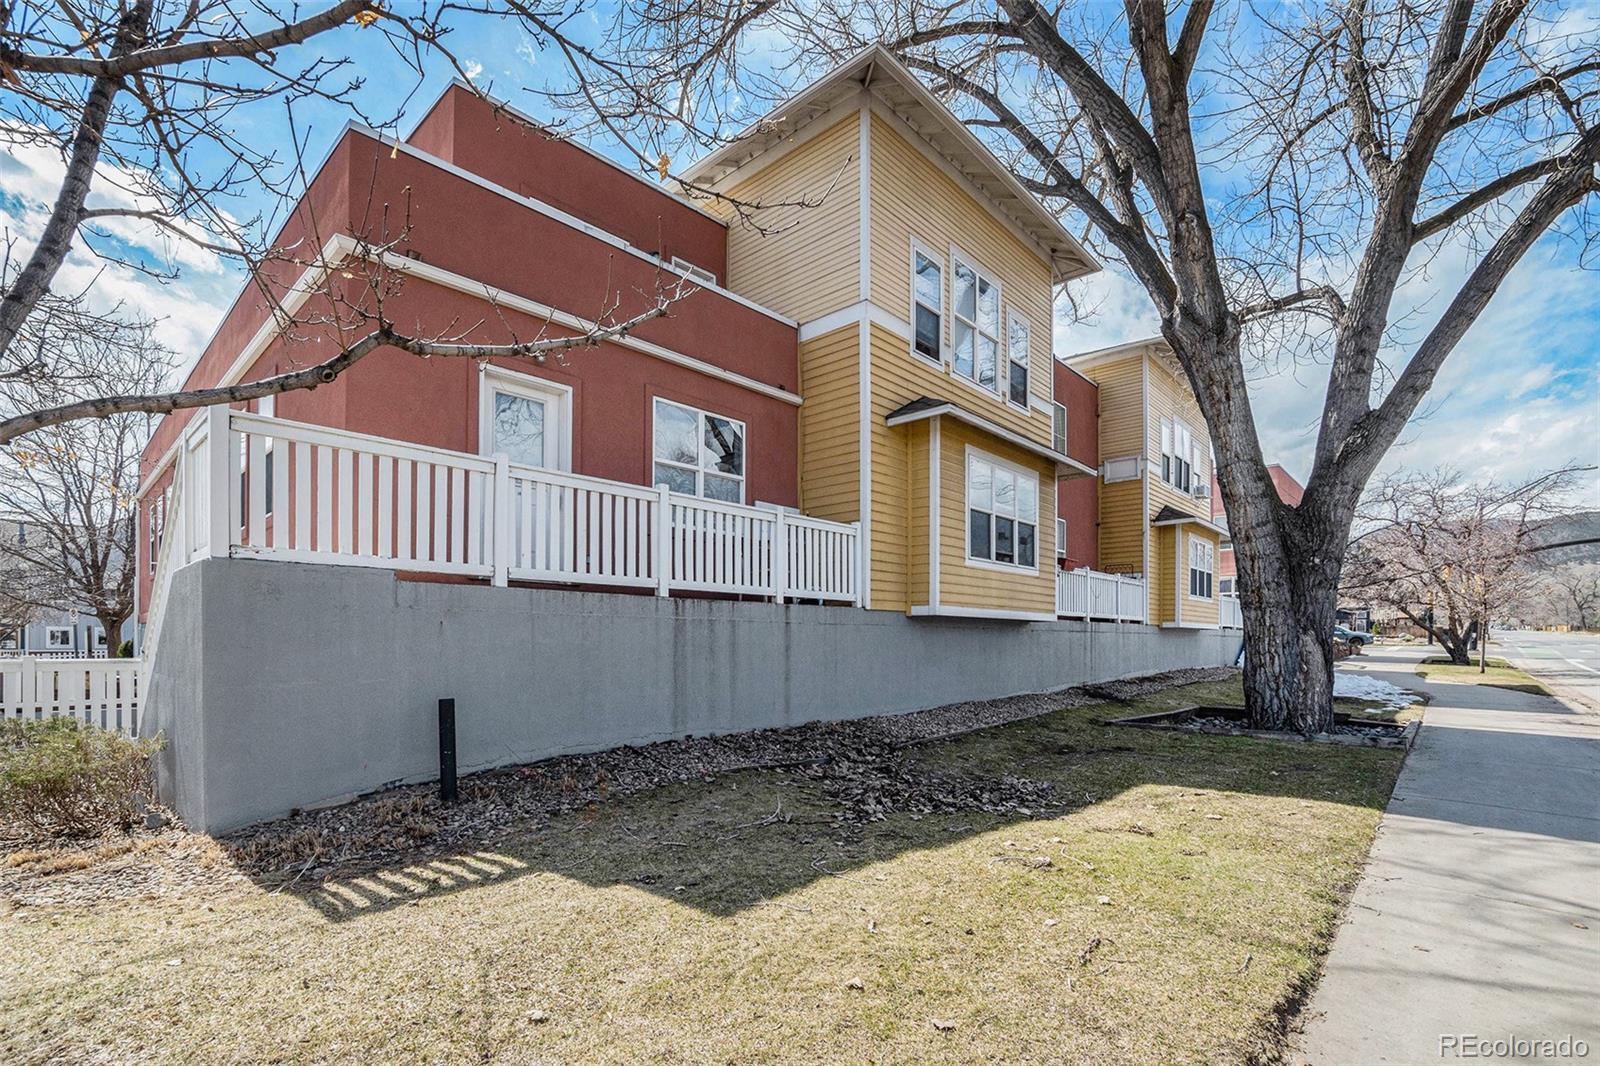 Photo one of 2610 Iris Ave # 101 Boulder CO 80304 | MLS 2458059